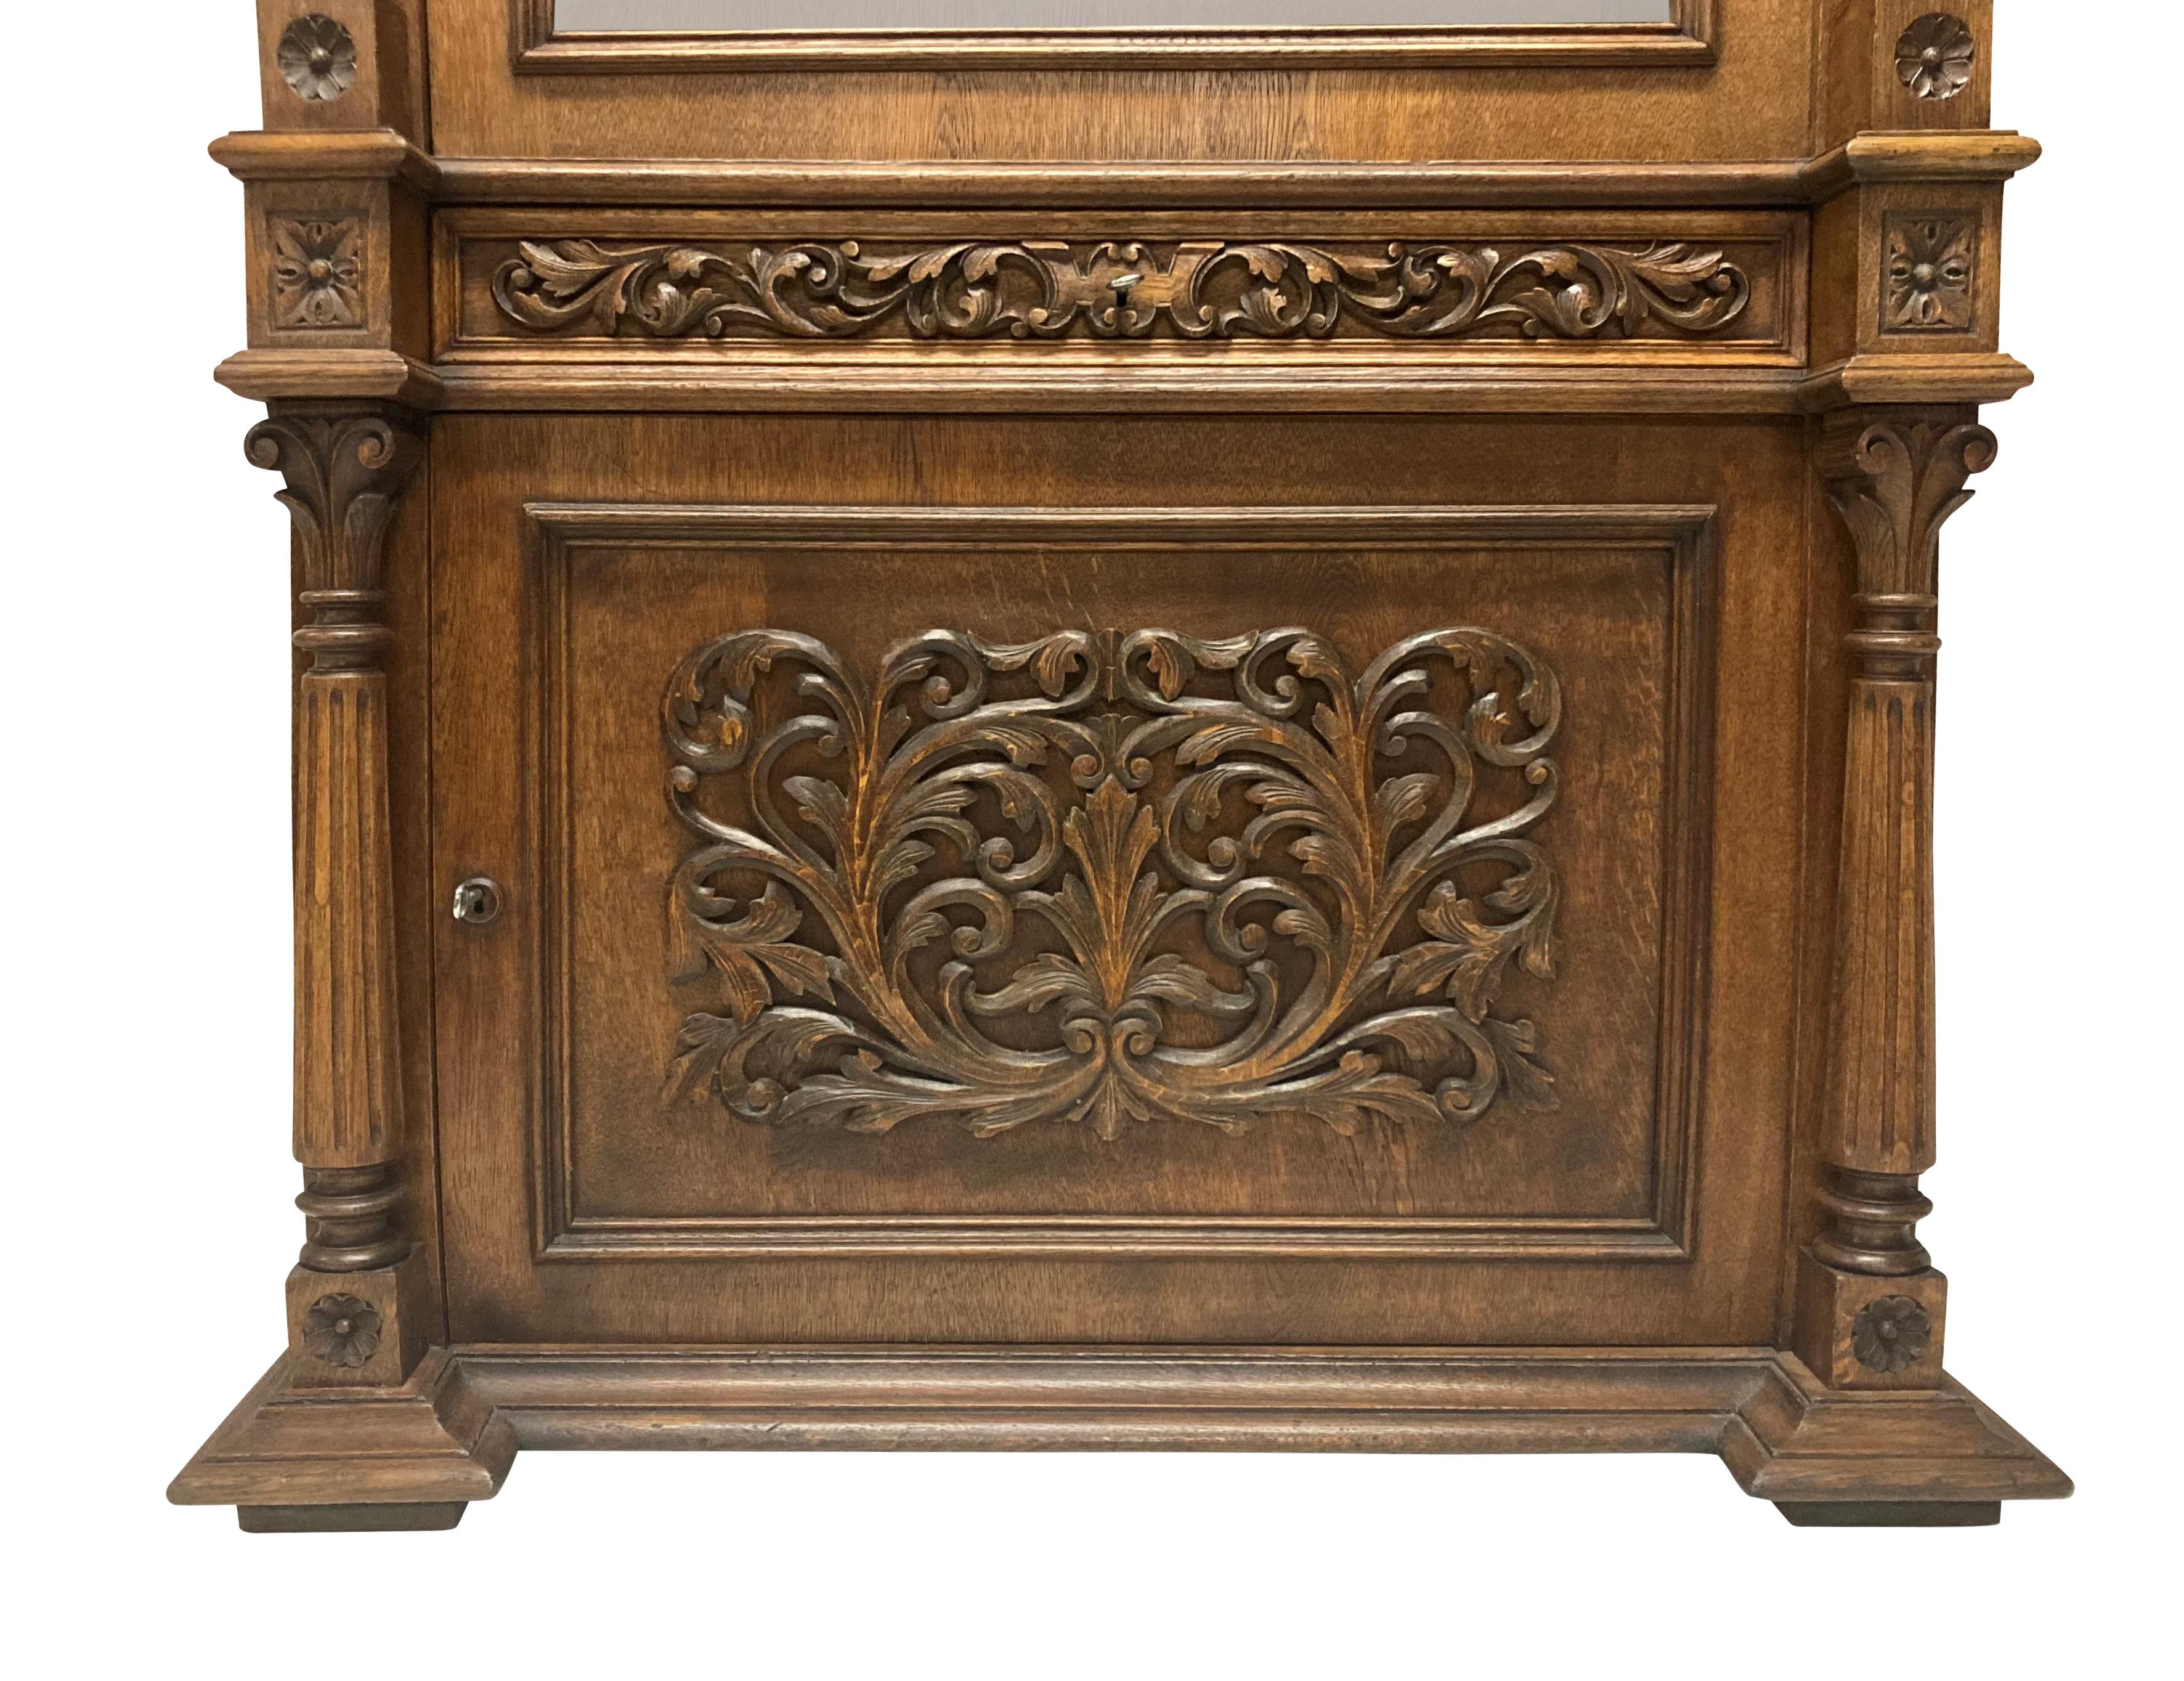 A large English solid oak gun cabinet in the Romanesque manner, with a glazed (clear glass) lockable upper cabinet for eight guns, with a lockable drawer beneath and lower cupboard. Decorated throughout and with a good patina.